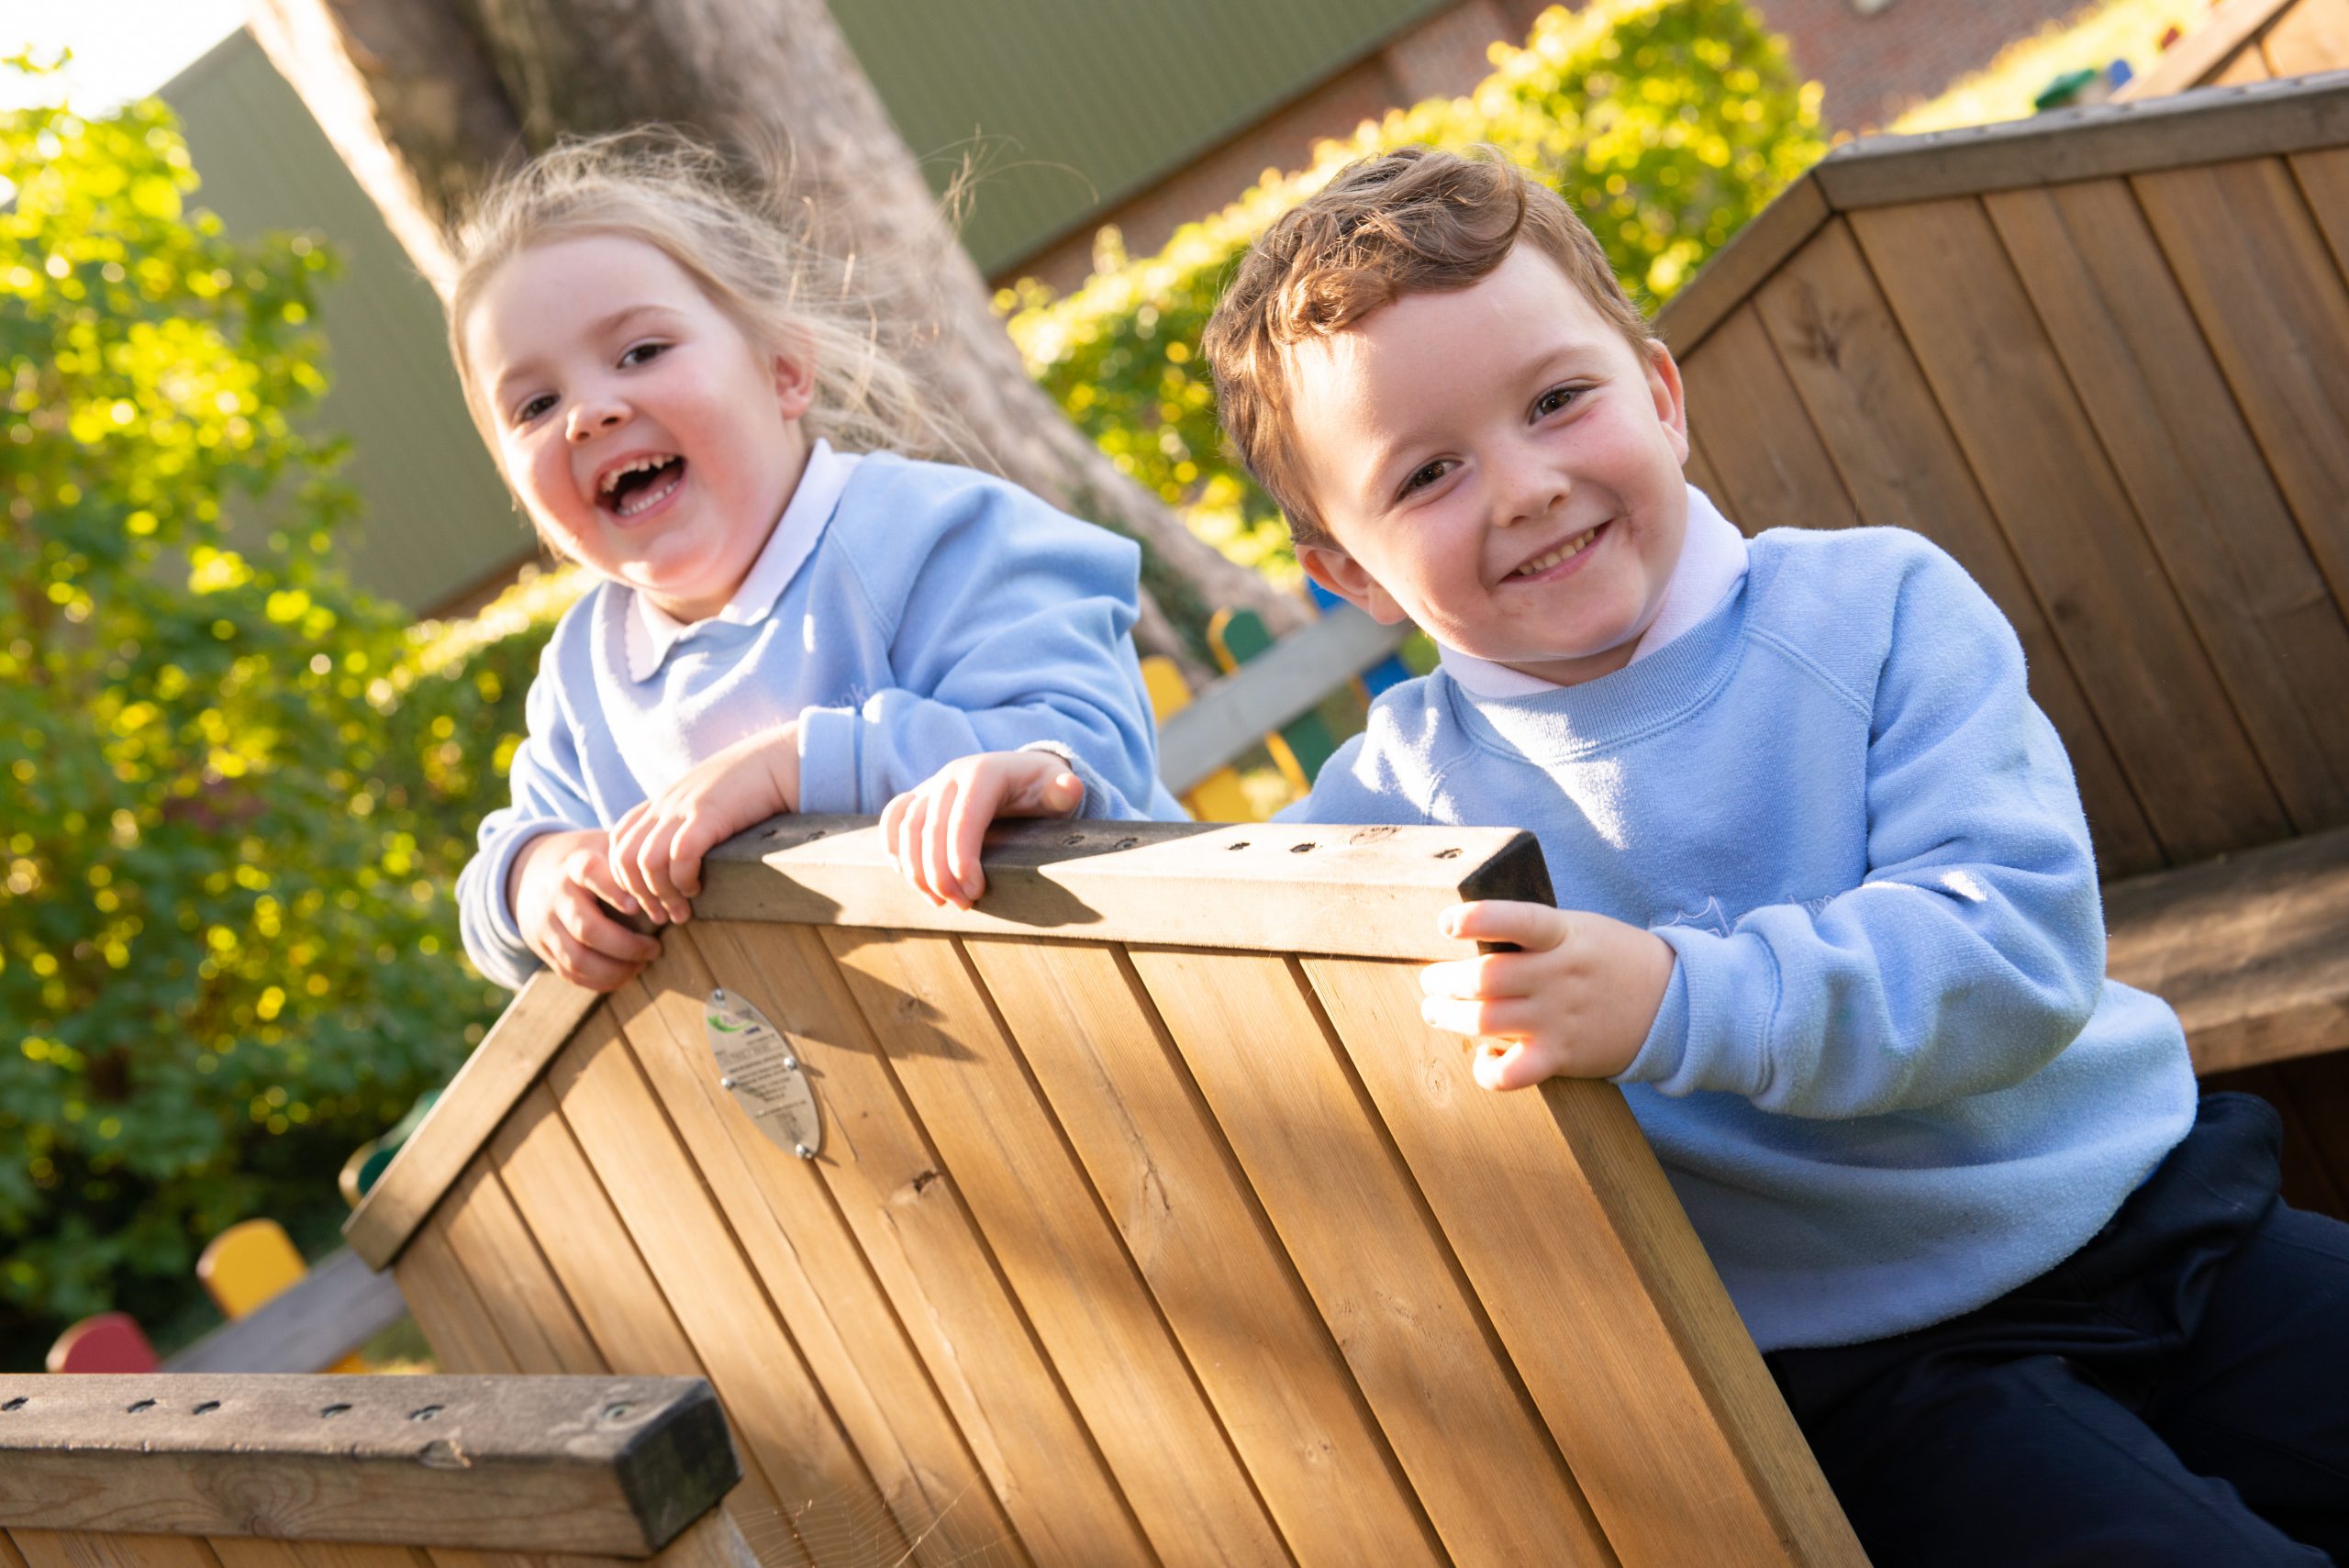 Two young children playing at Rookwood Nursery School in Andover, Hampshire.